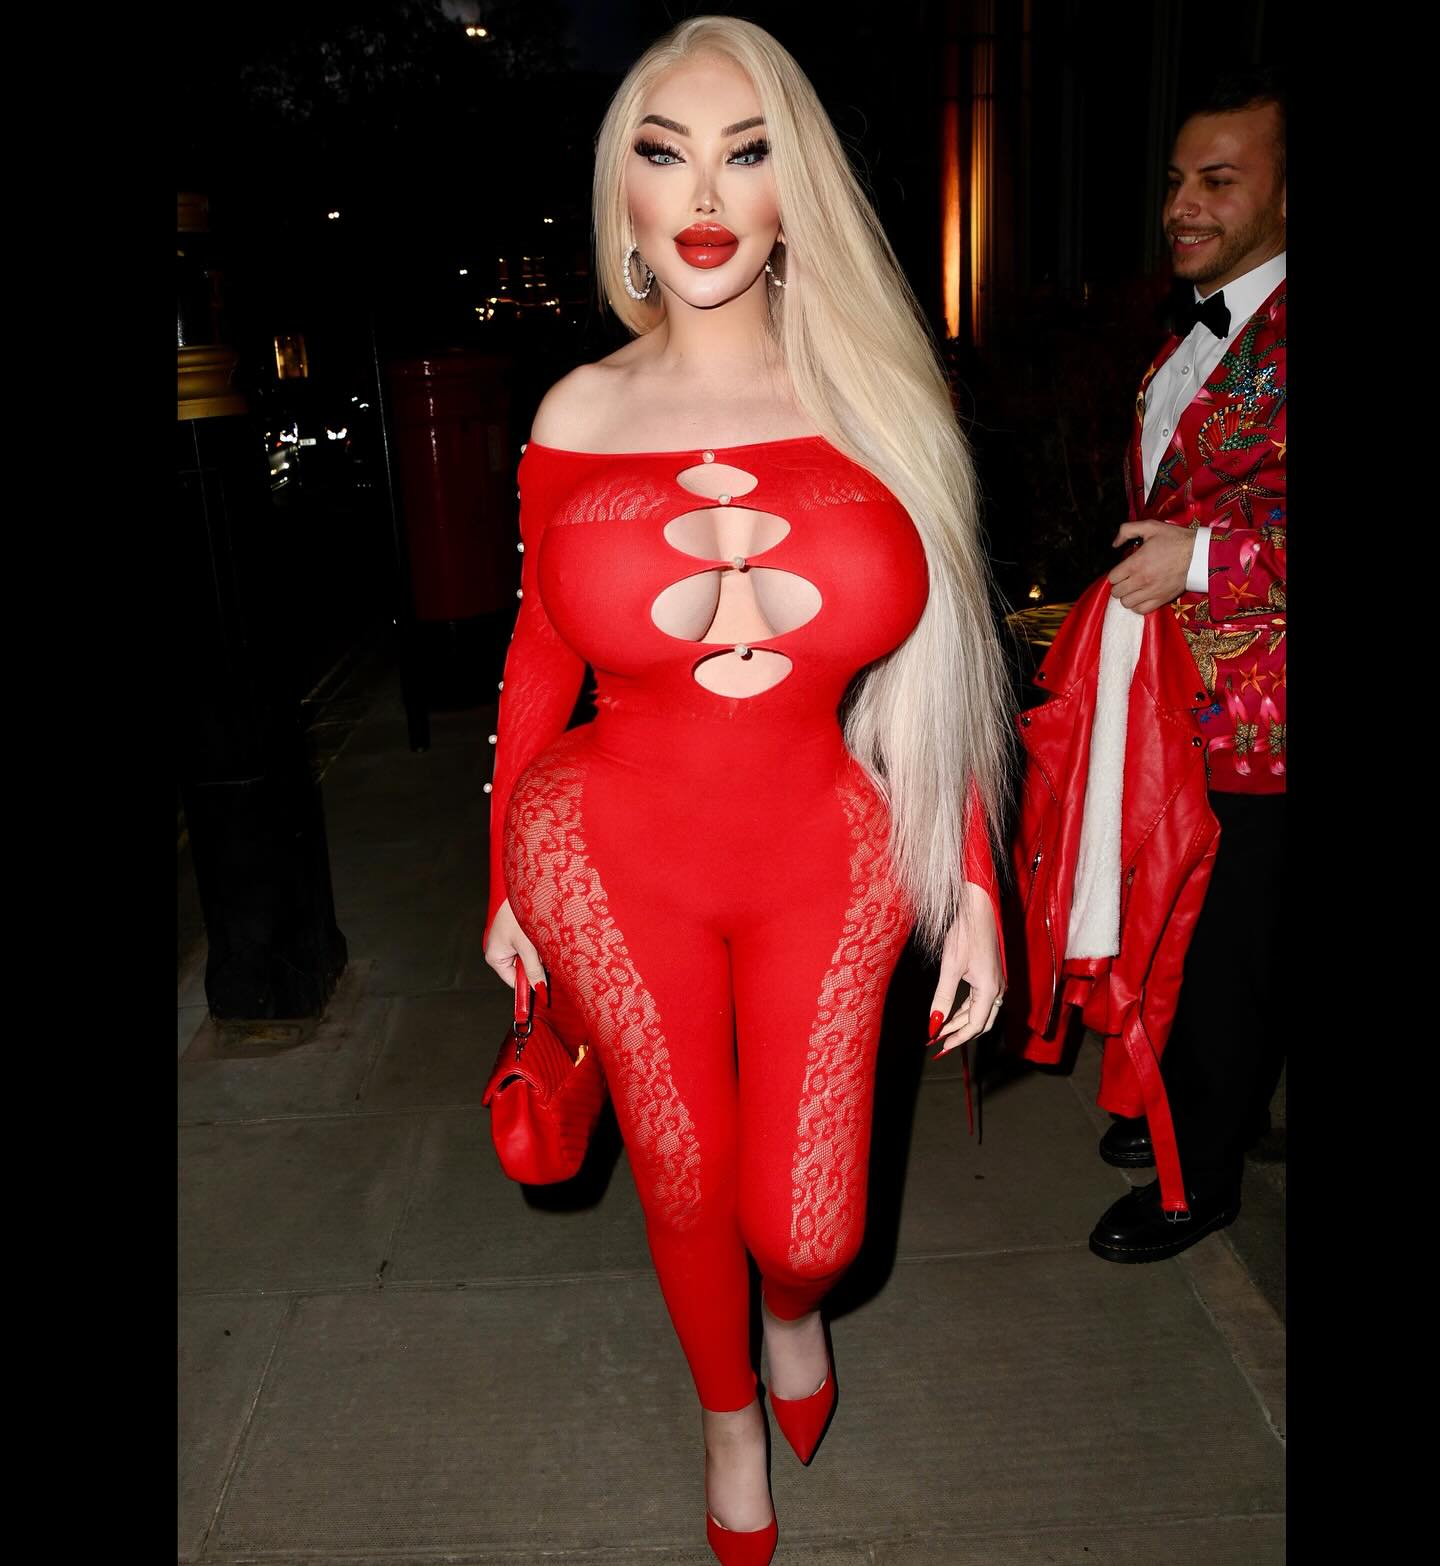 In a world full of ordinary, dare to wear red by @FashionNova #FashionNova #NovaBabe 

#jessicaalves in #london #mayfair